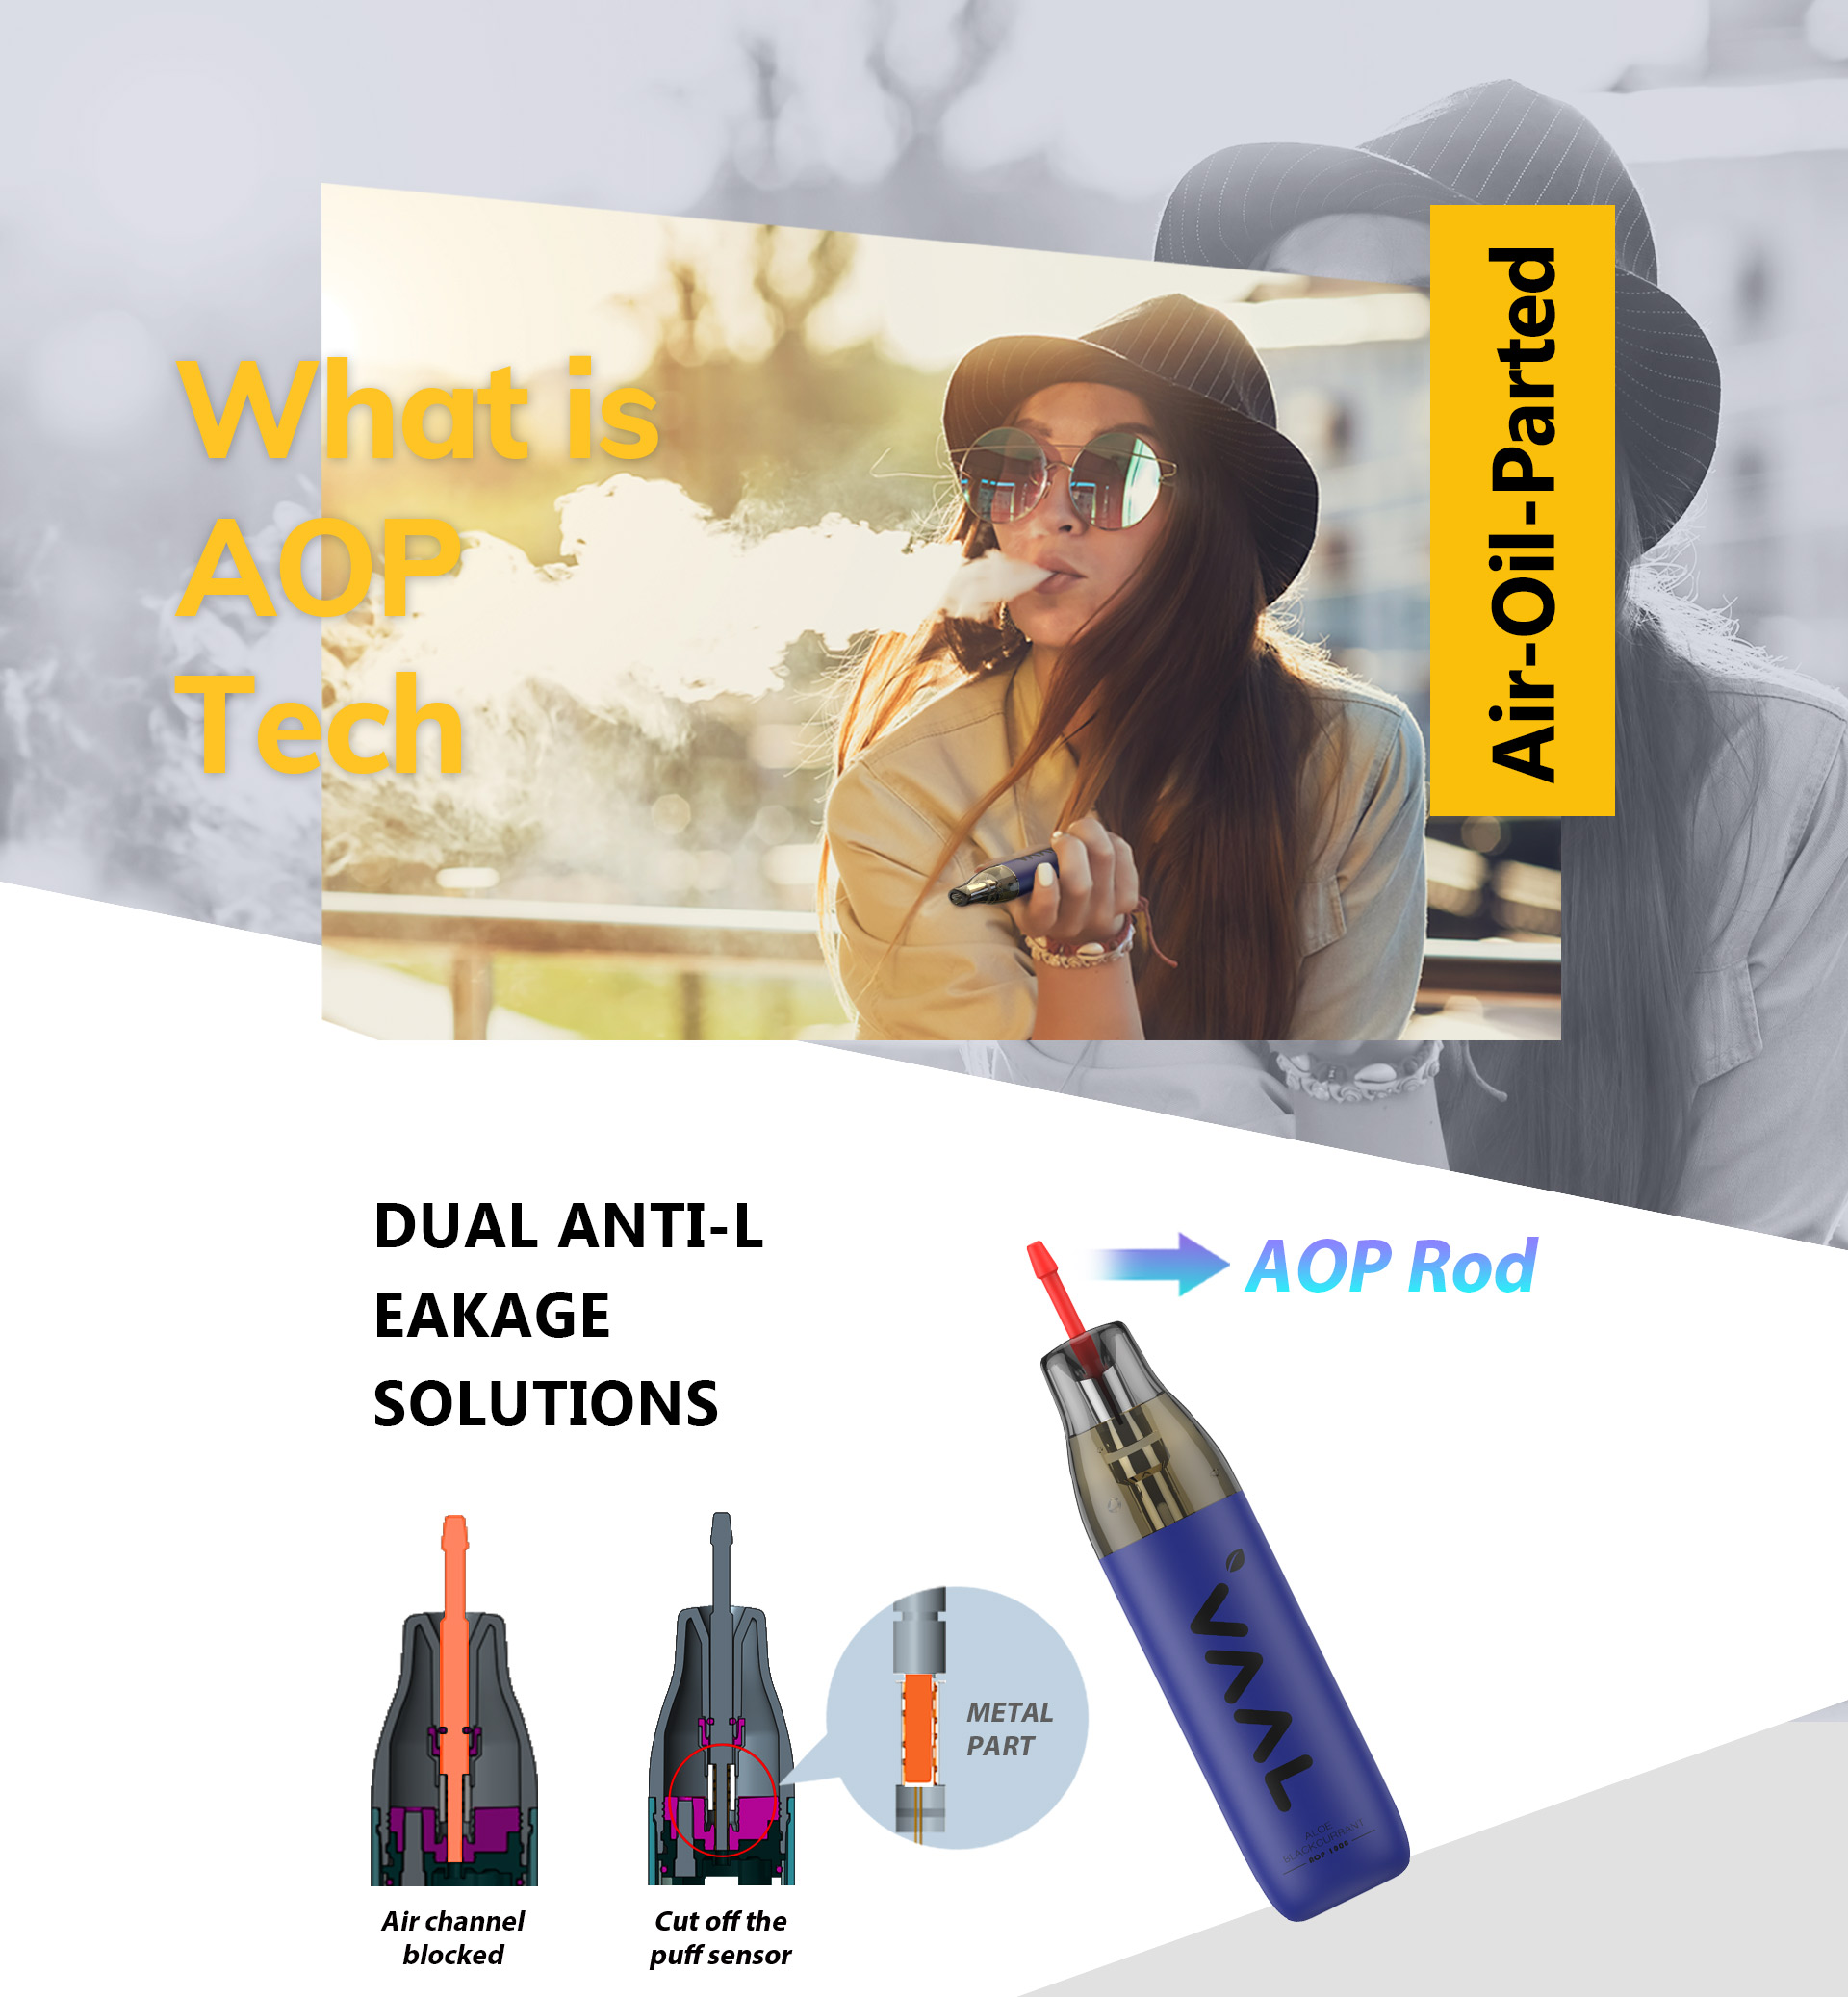 The Air-Oil-Parted Technology is the latest innovative separation technology from JWEI Group, which will avoid any leakage during delivery or storage. Supported by the larger battery, the flavored e-juice inside can be used till the last drip. In addition, the simple act of unplugging won't affect your pleasant vaping enjoyment.